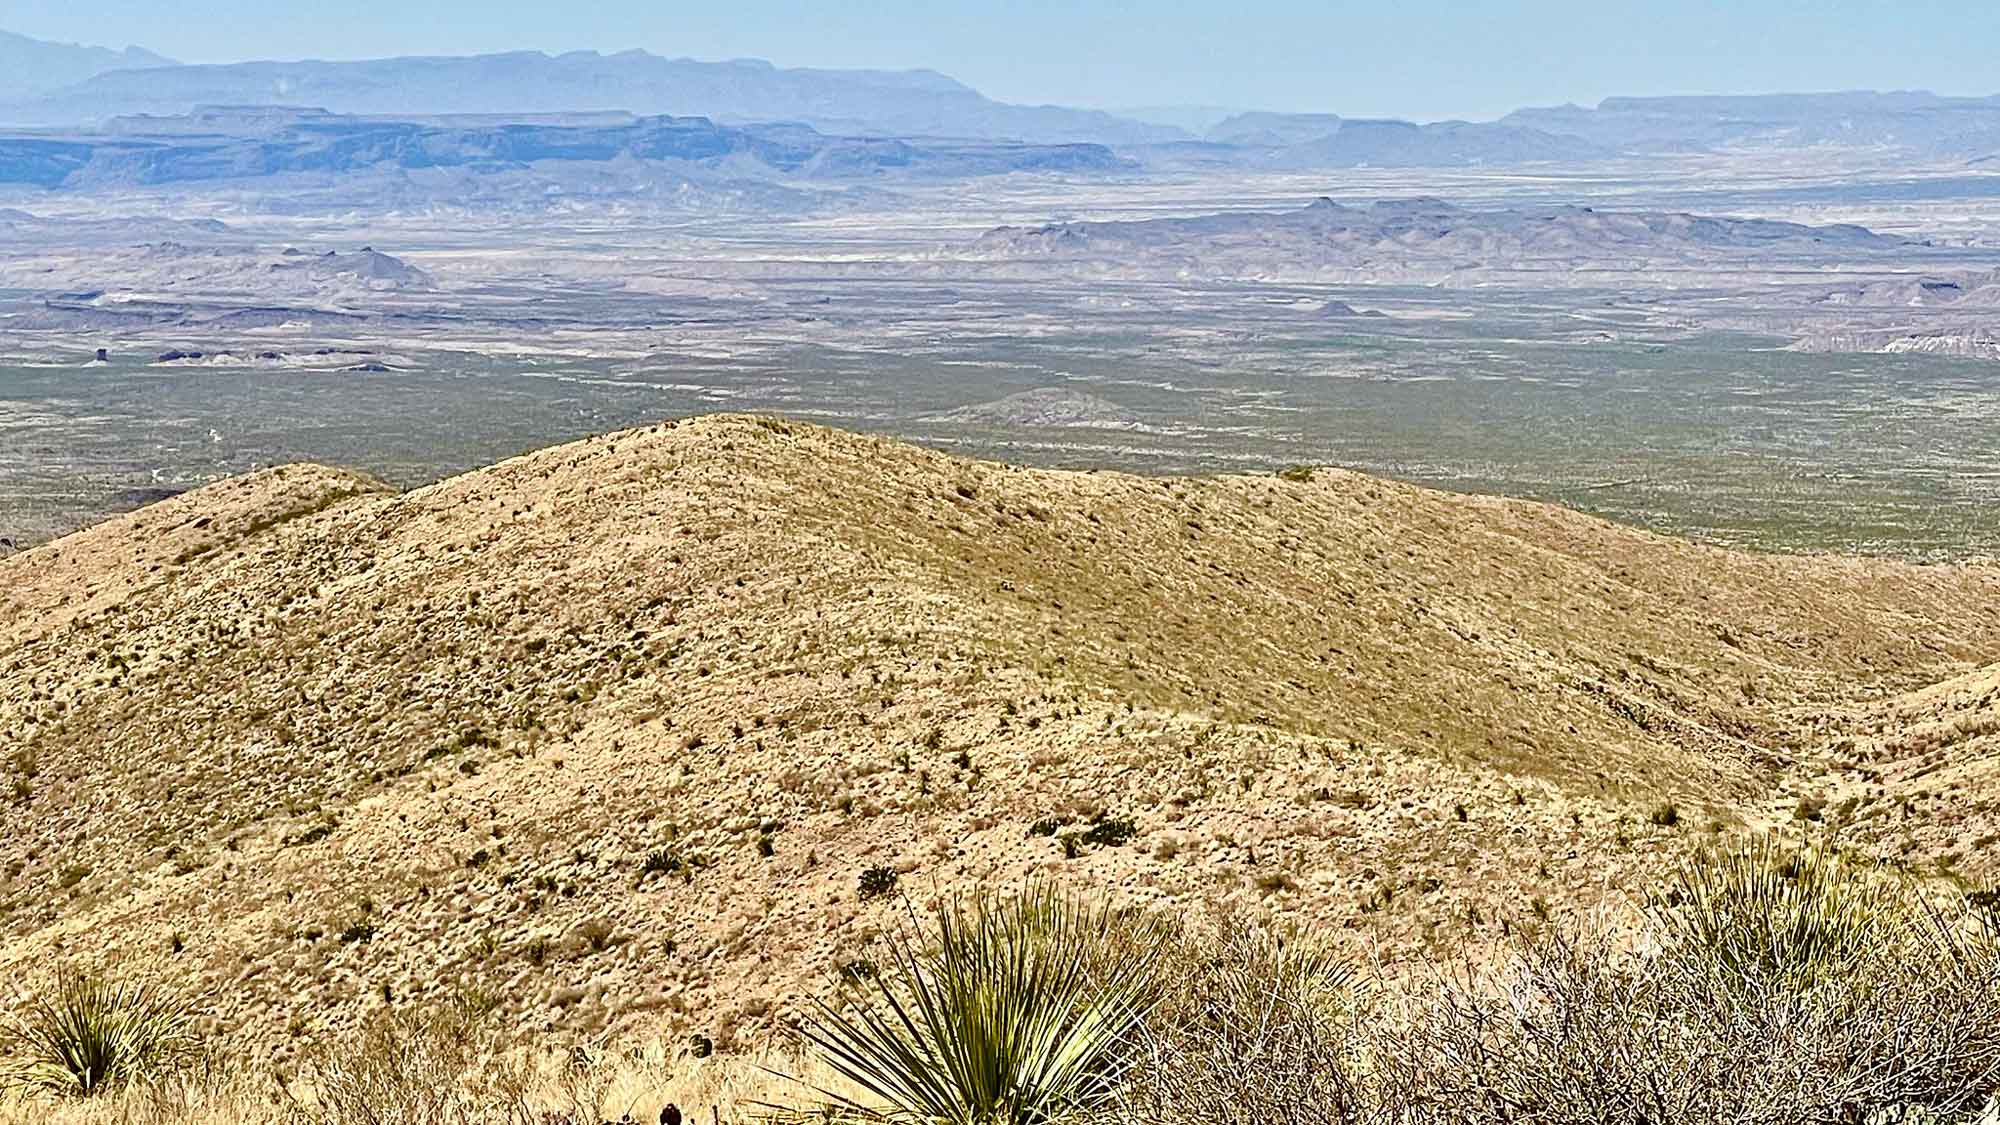 Photograph showing the landscape of Big Bend National Park in Texas.